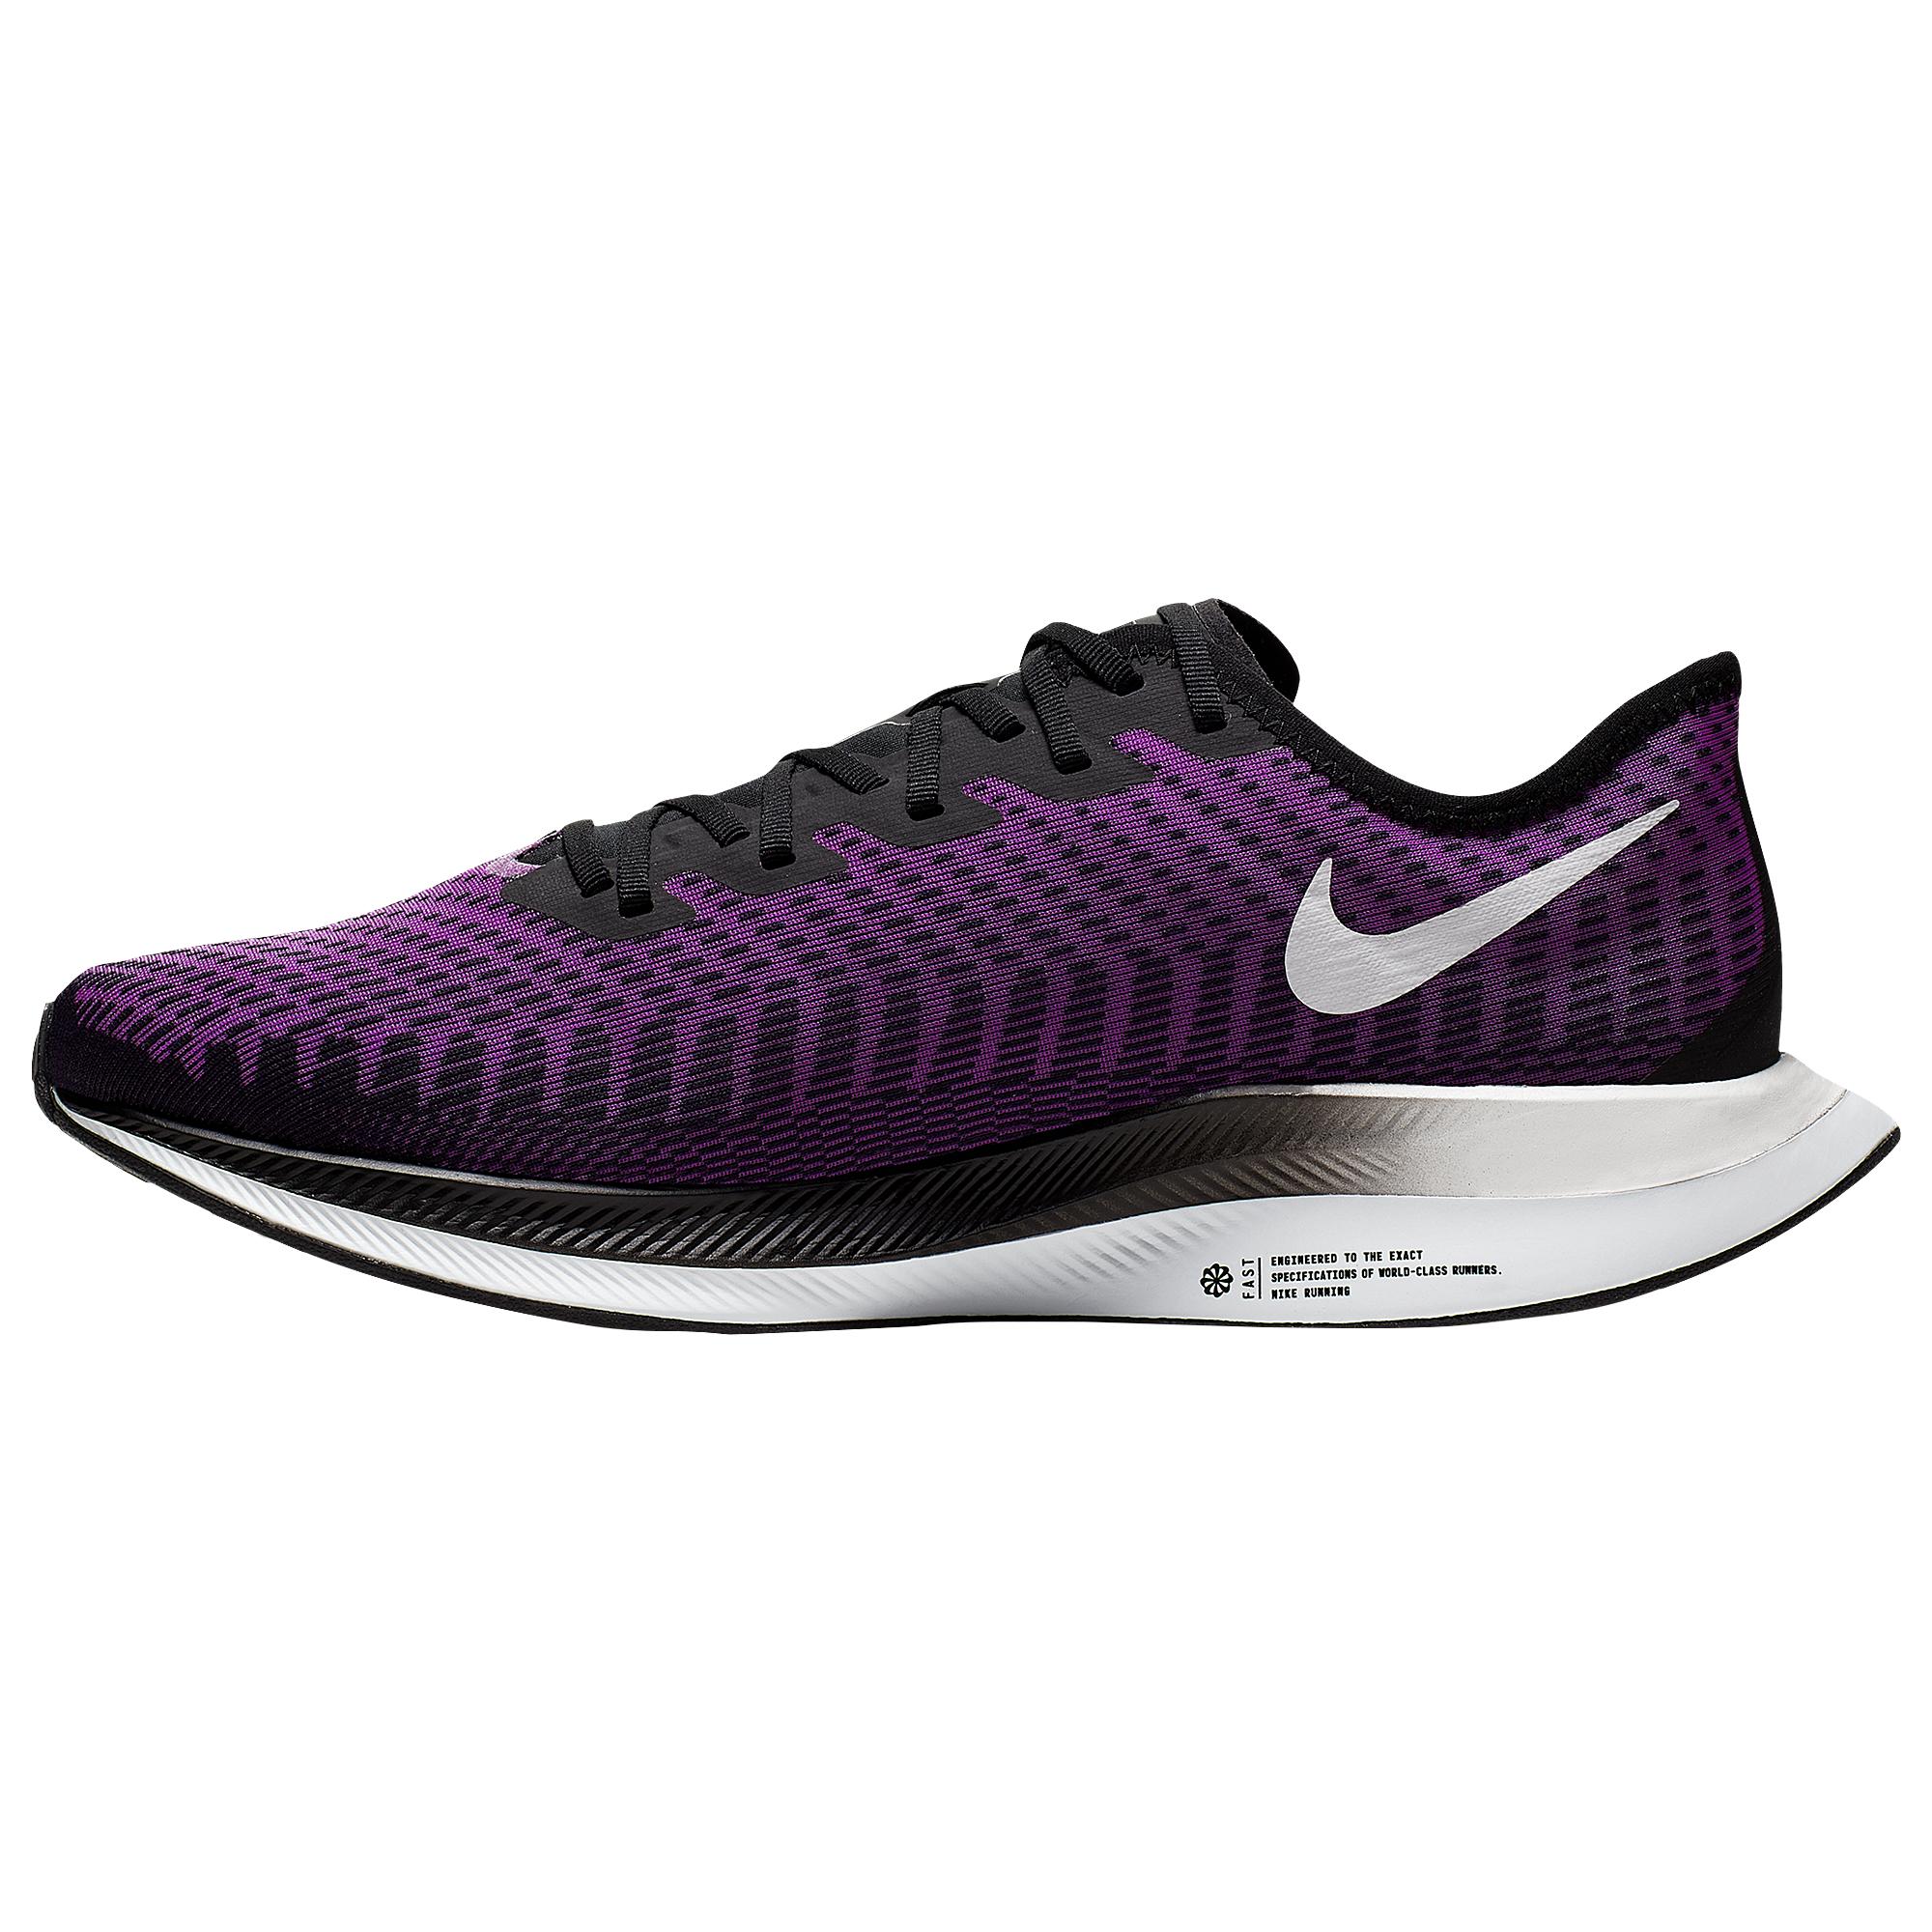 Nike Rubber Air Zoom Pegasus Turbo 2 Running Shoes in Purple for Men - Lyst